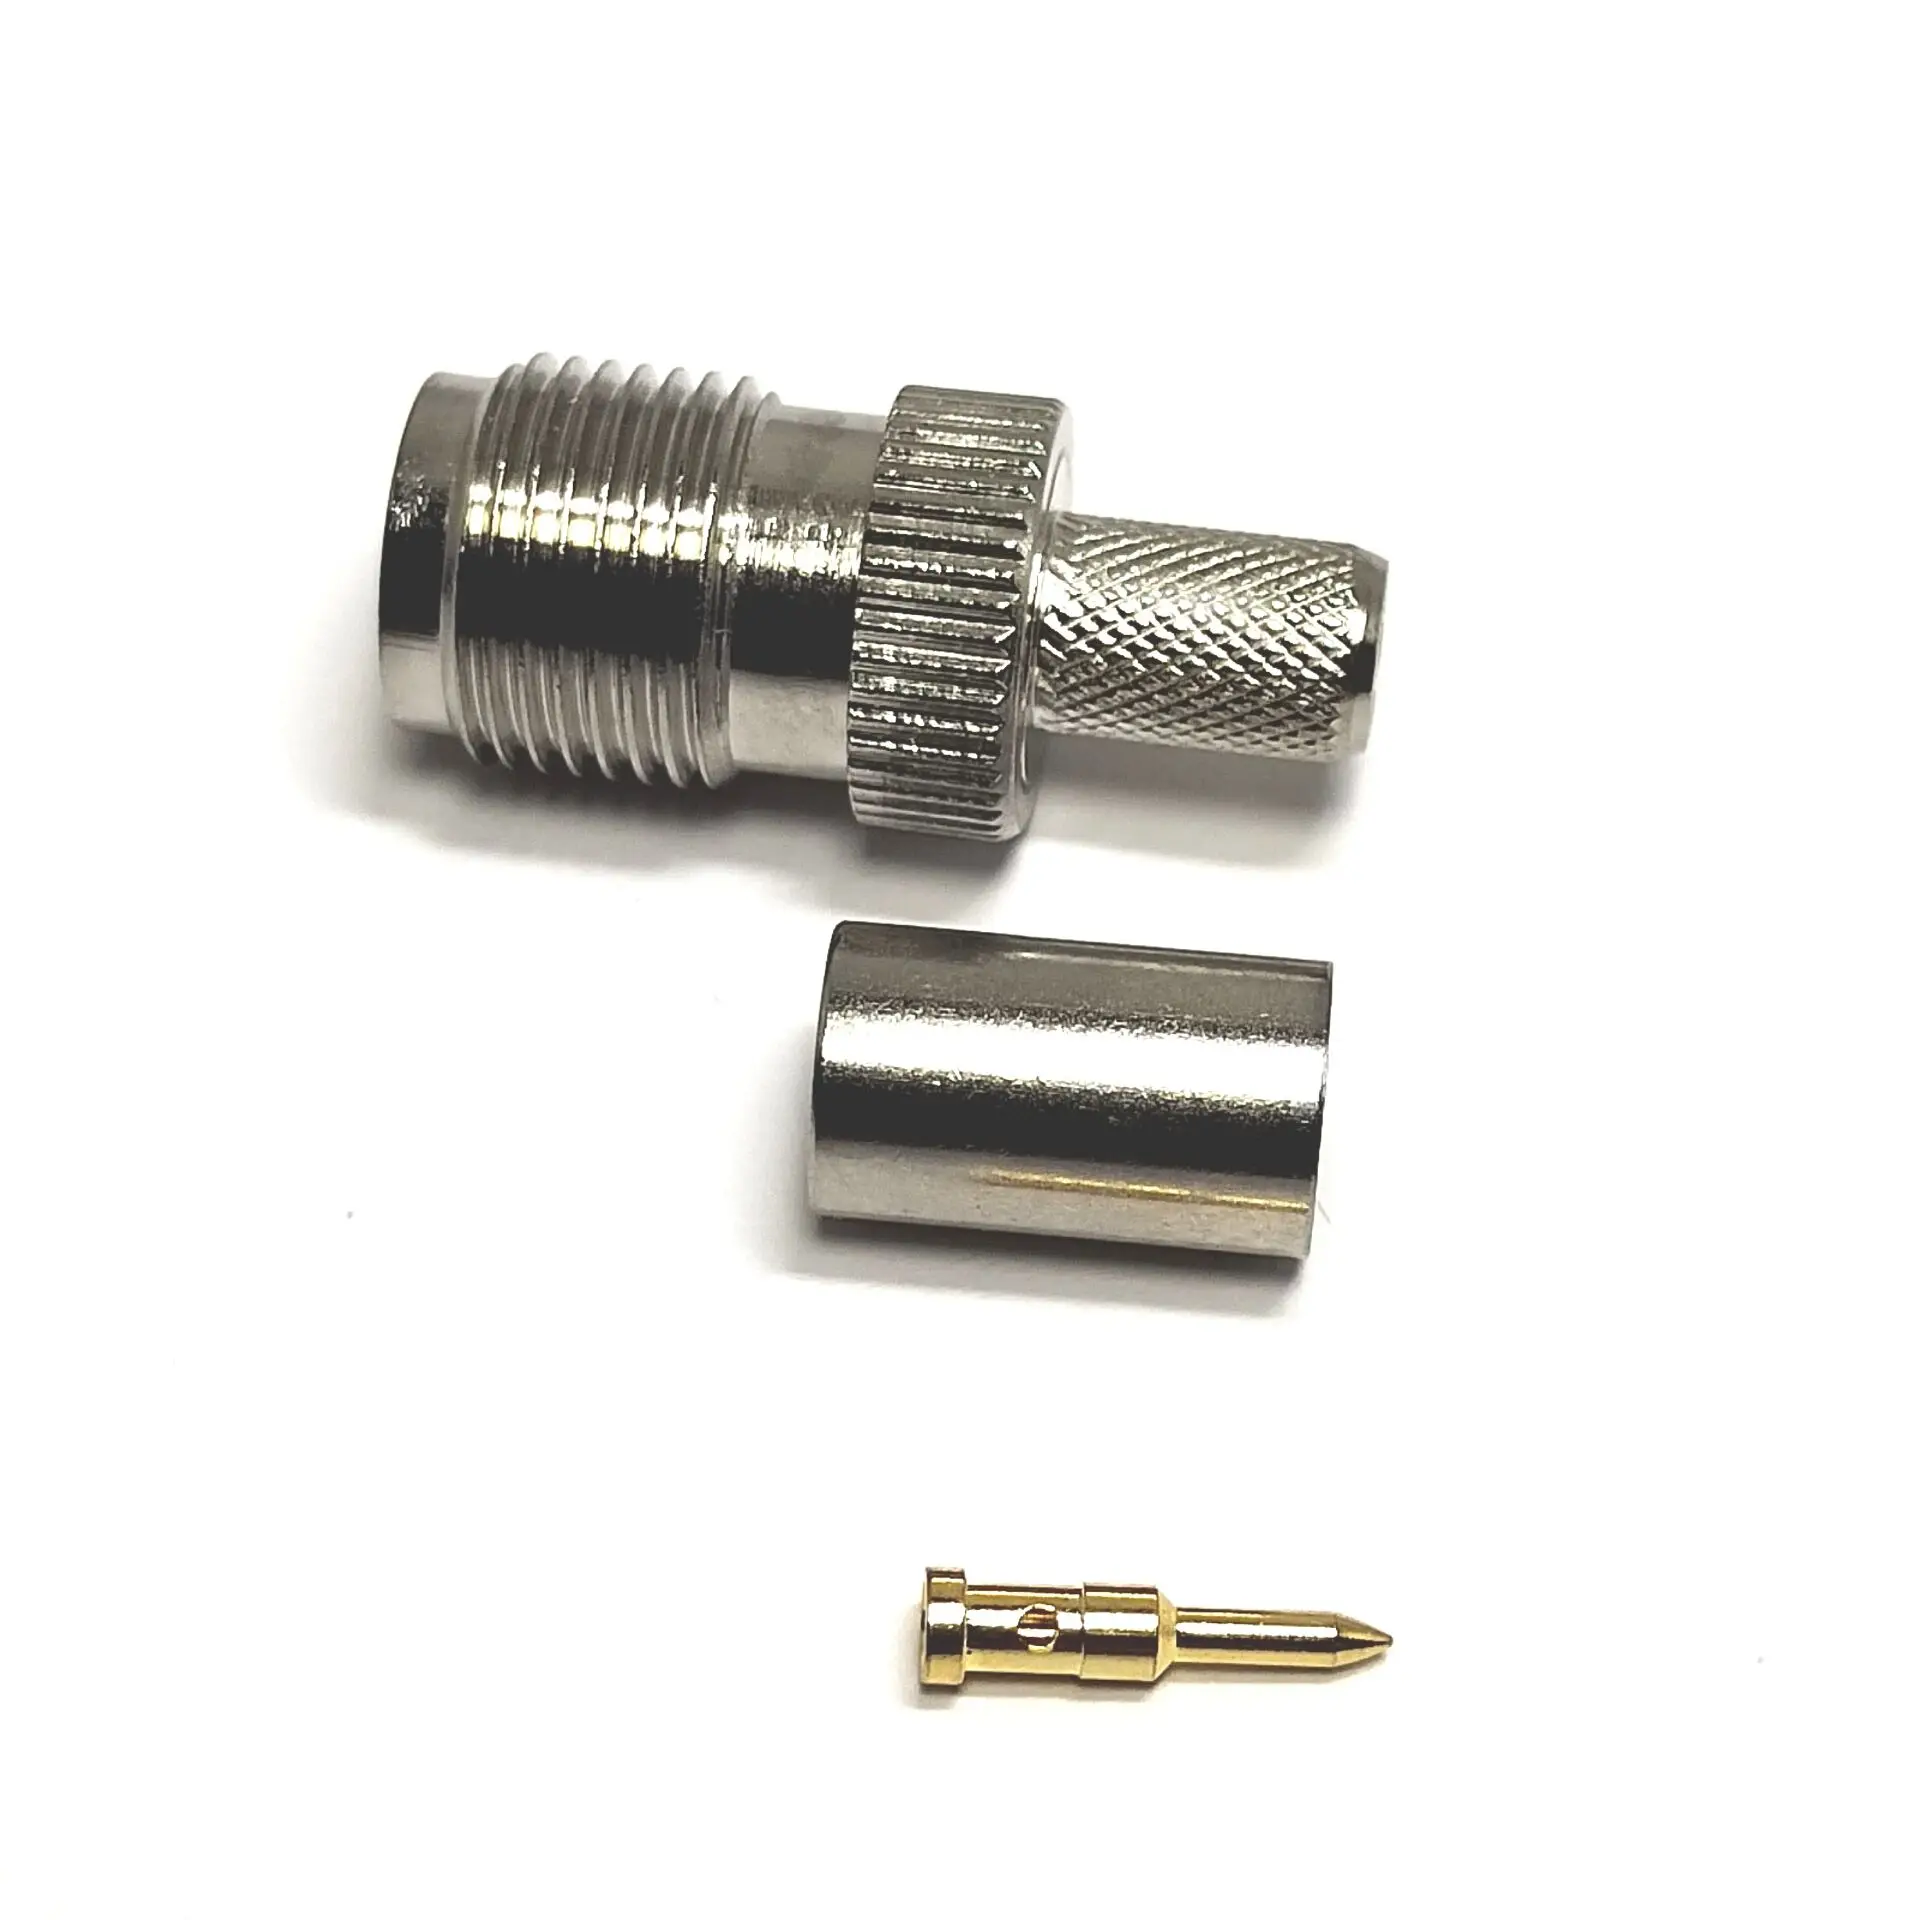 Nickel plated RP Tnc female jack  lmr240 H155 cable  crimp straight Reverse polarity RF coax  connector manufacture